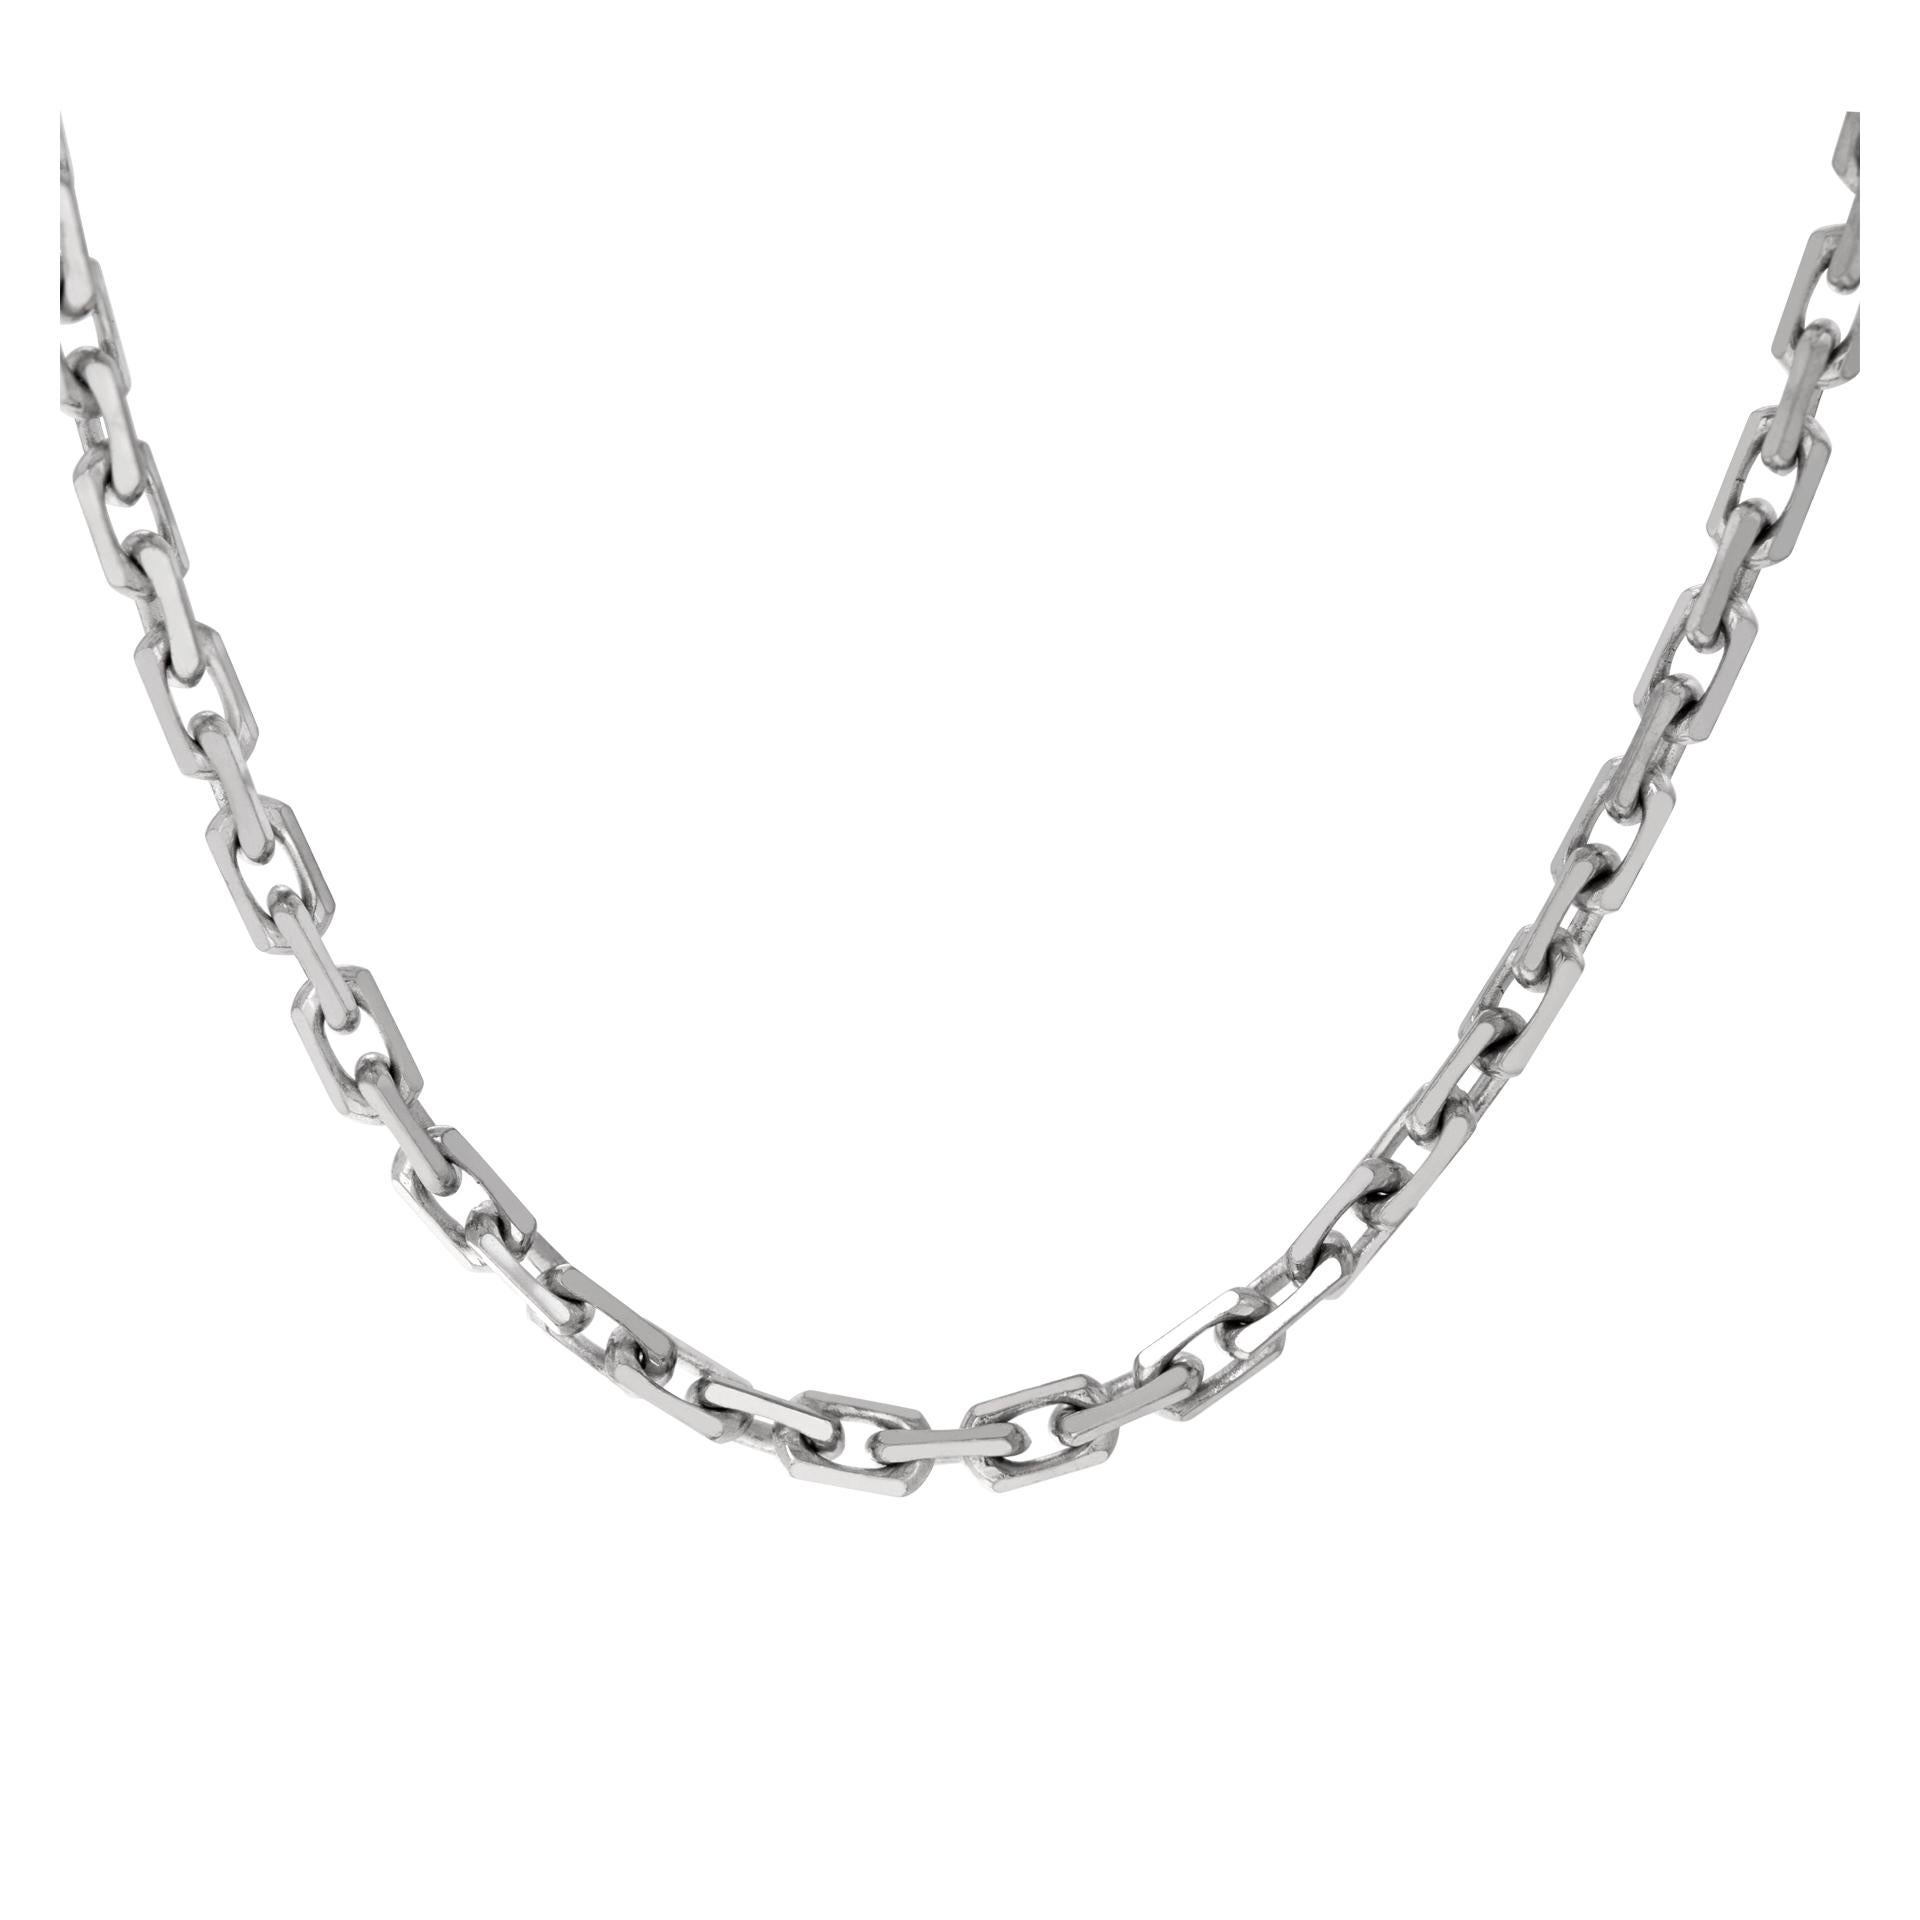 Thin link 1mm width chain in 18k white gold. Measures 16 inches long.
